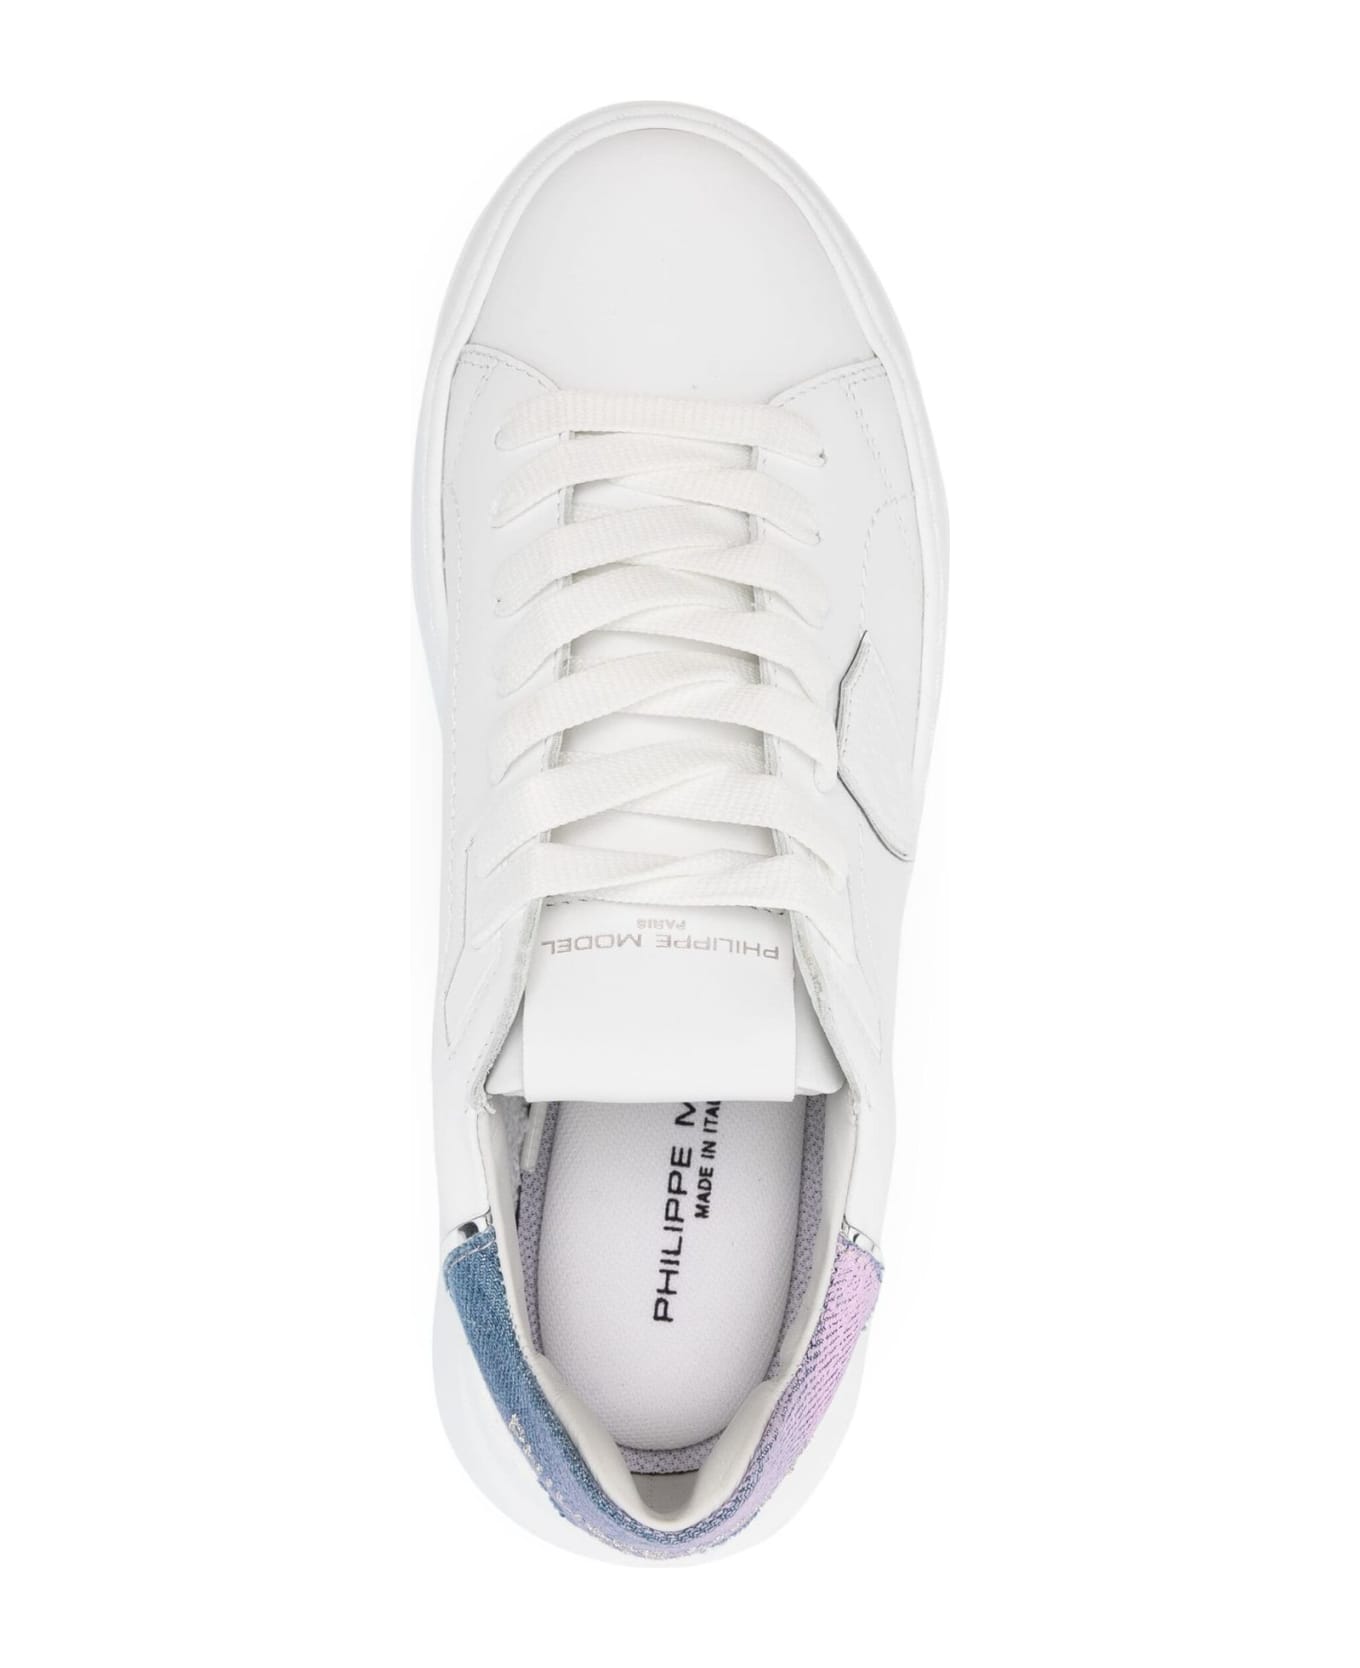 Philippe Model Tres Temple Sneaker White And Light Blue - White